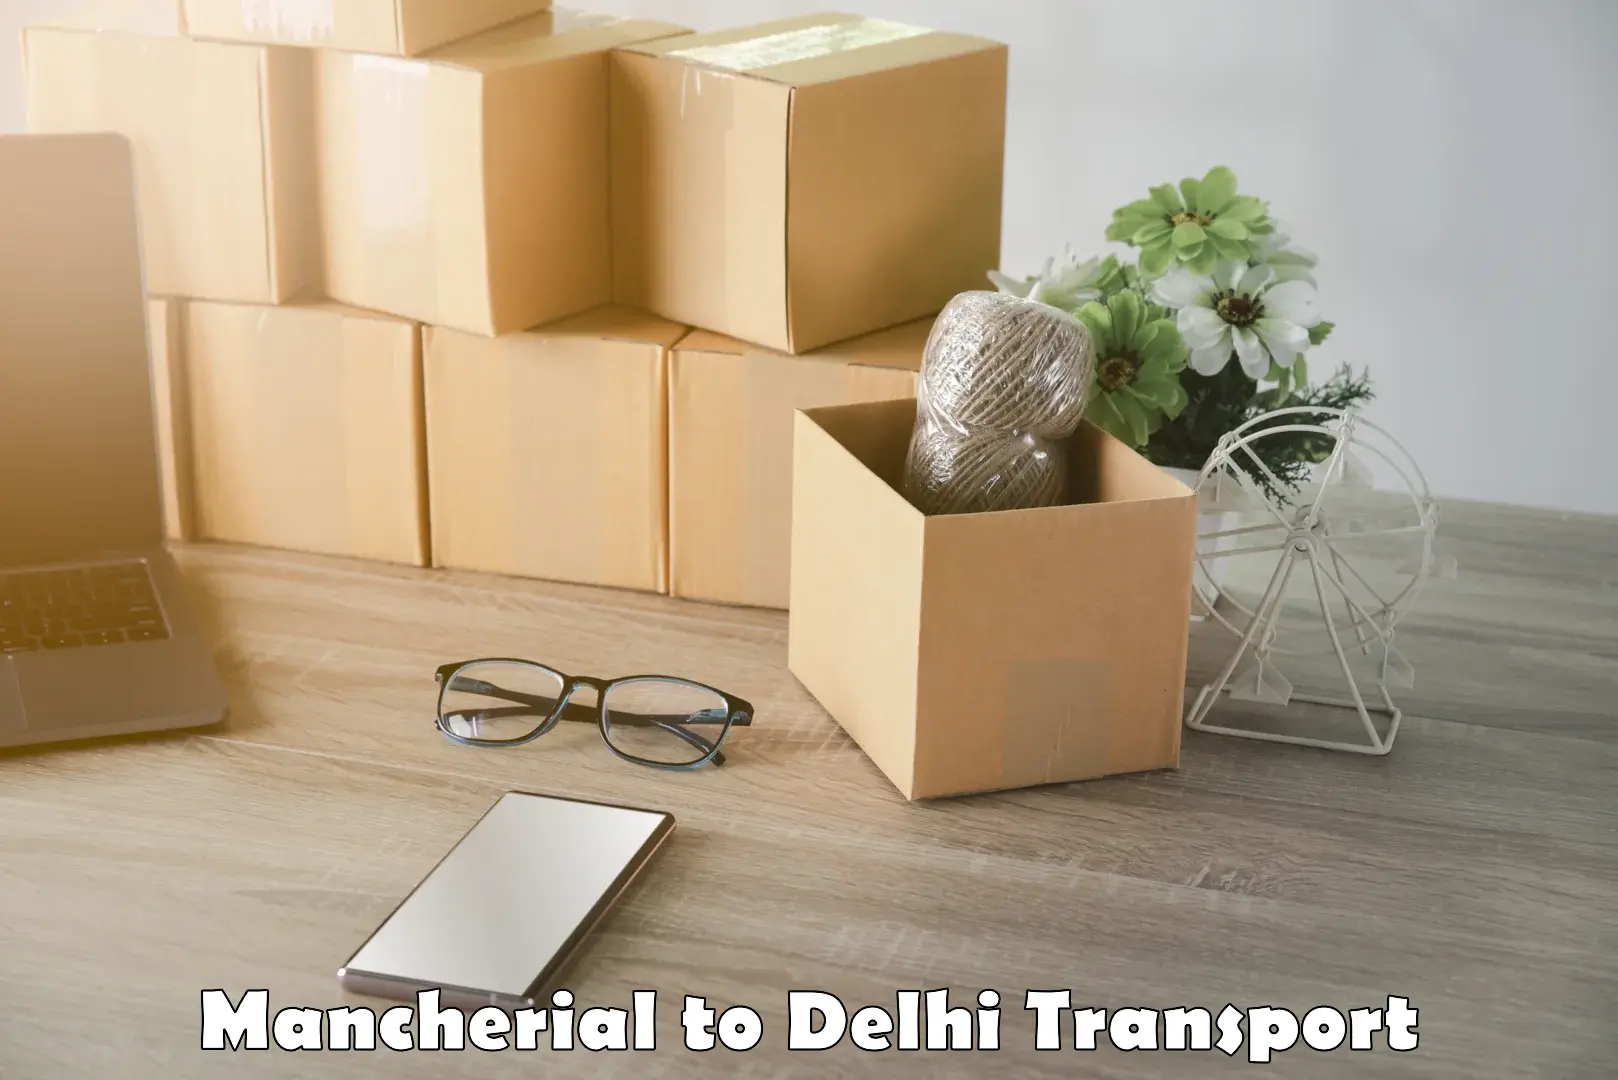 Truck transport companies in India Mancherial to Delhi